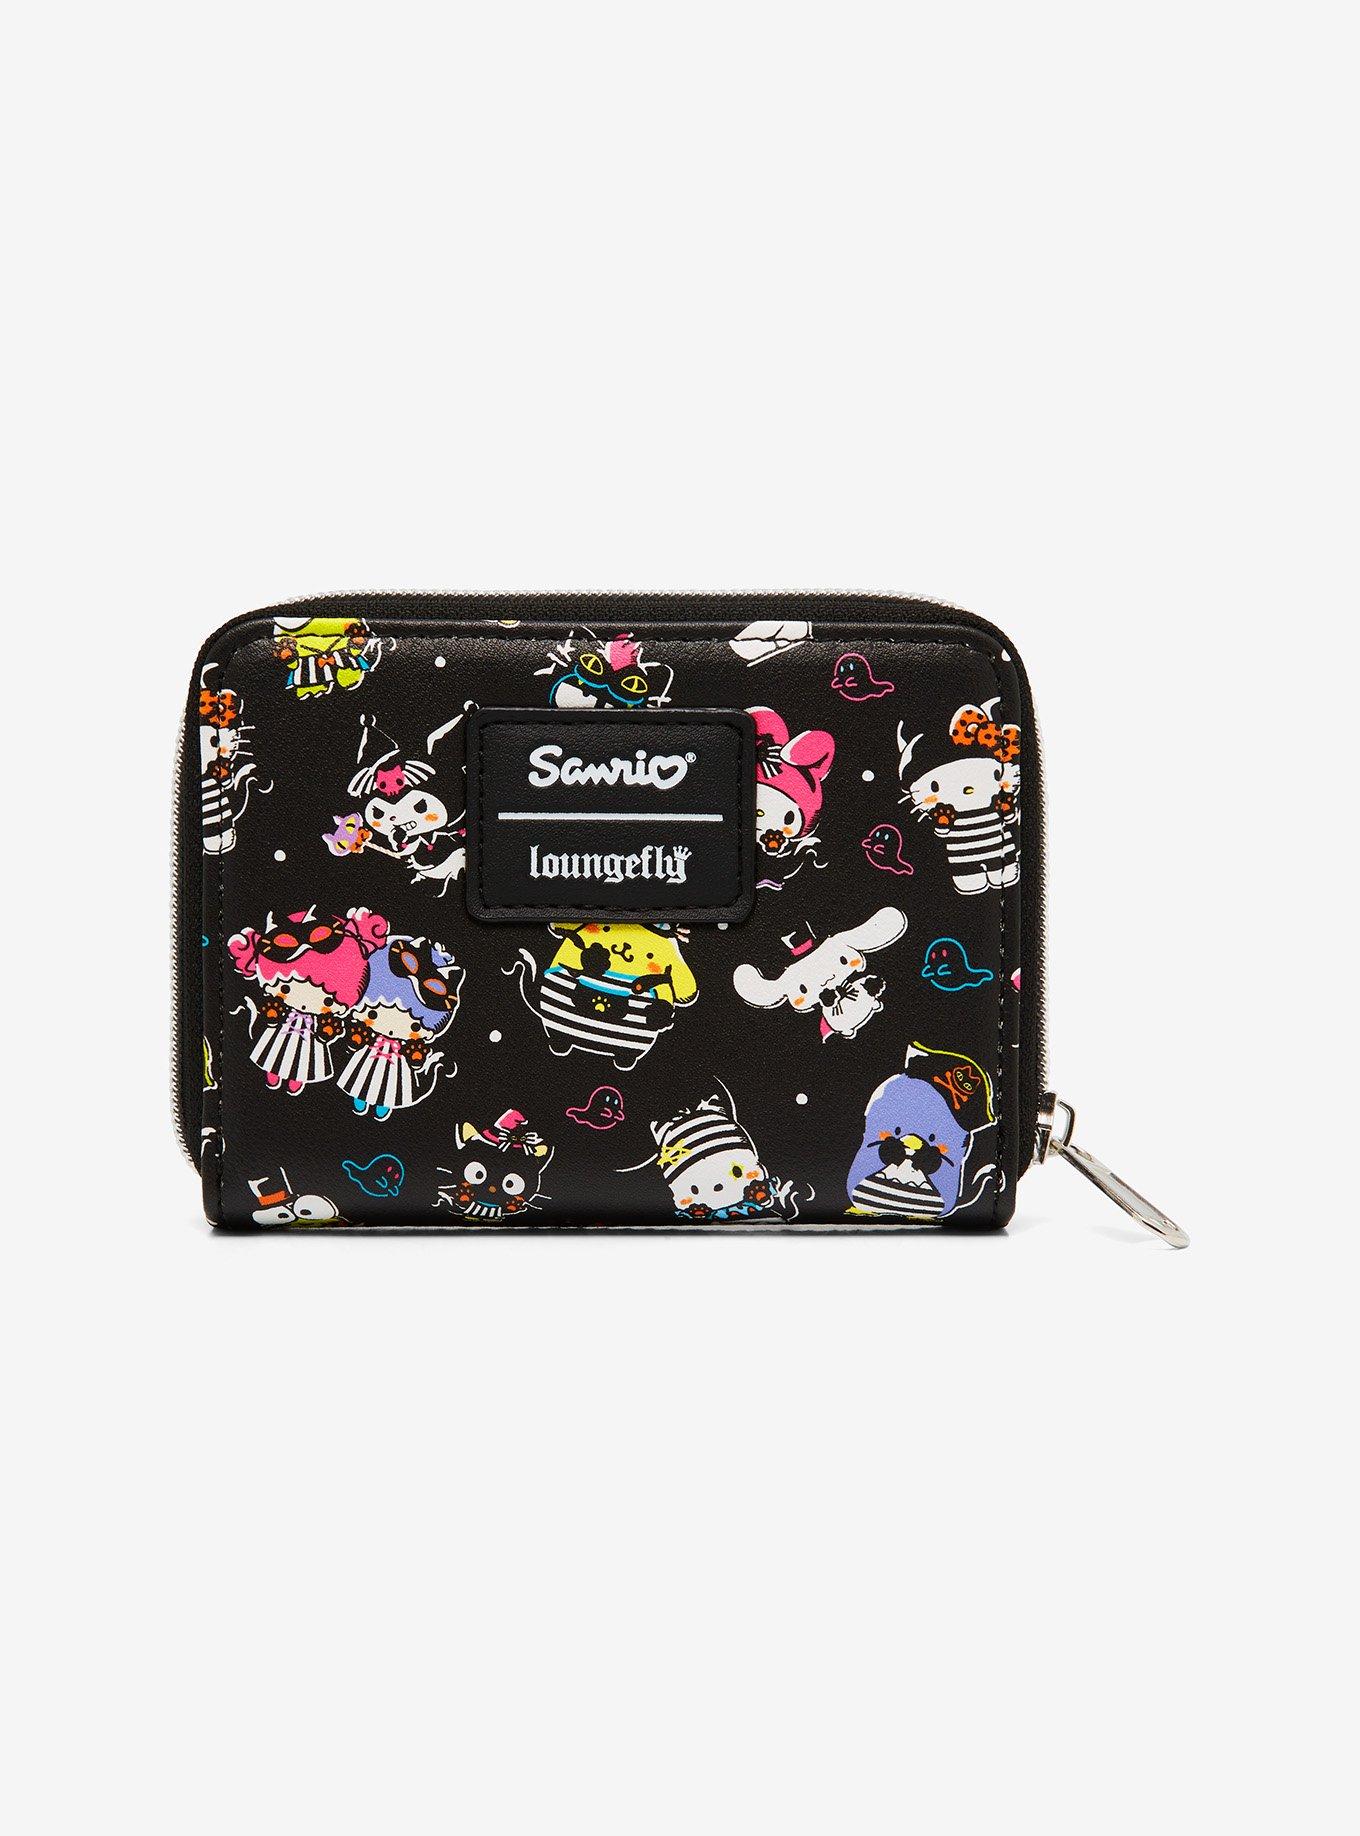 Best Loungefly Hello Kitty Purse for sale in Irvine, California